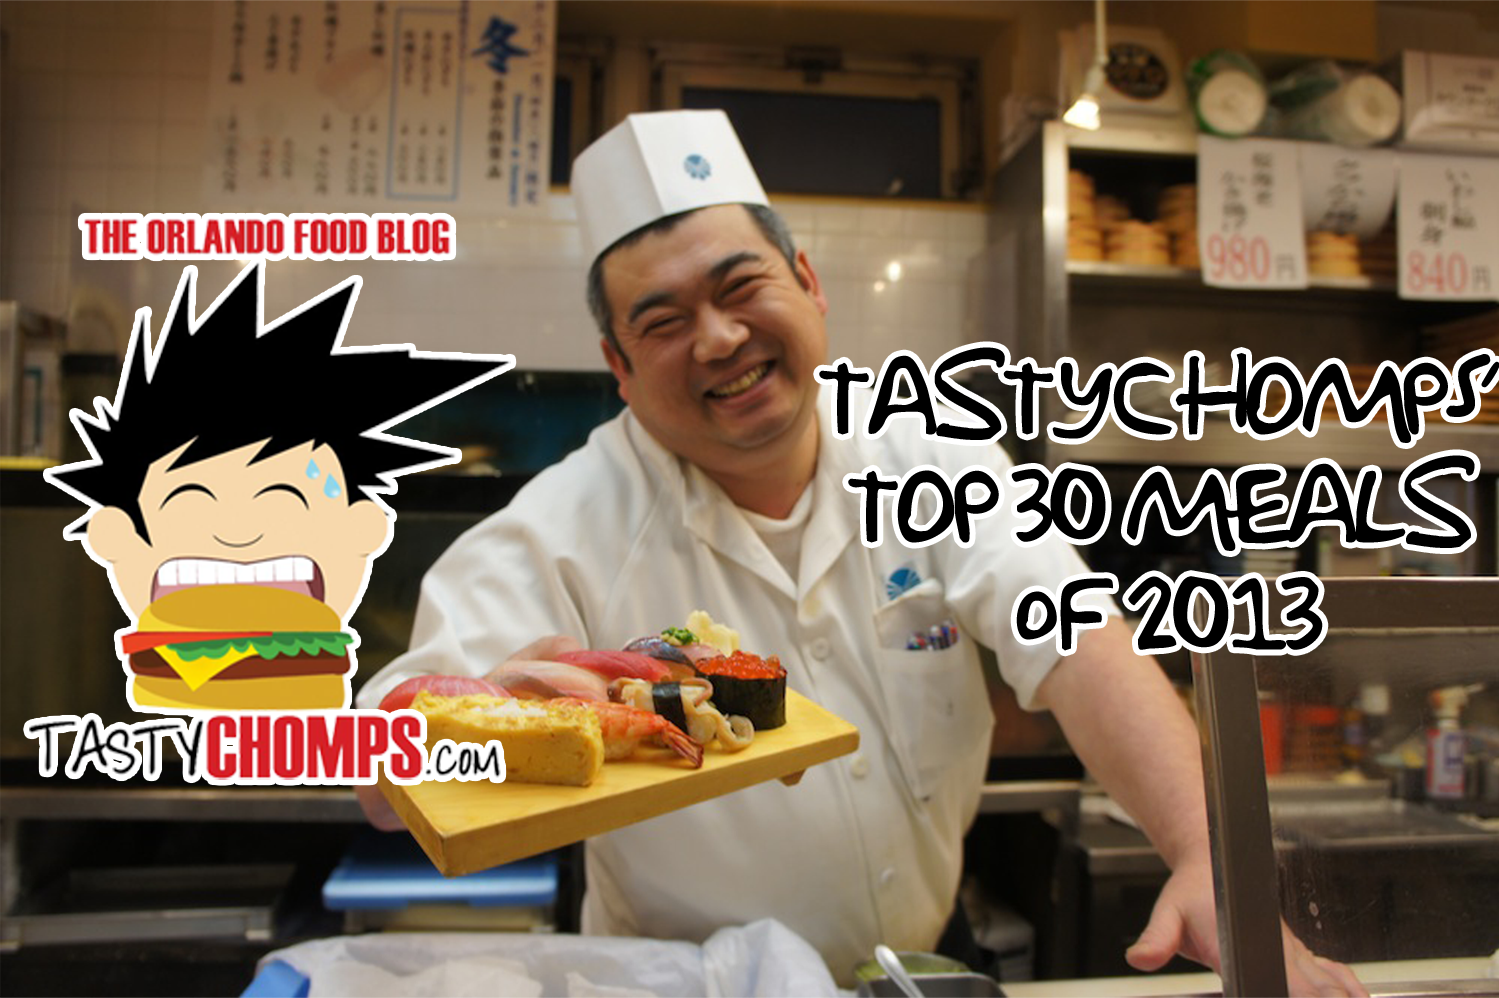 TastyChomps’ Top 30 Meals and Eats of 2013